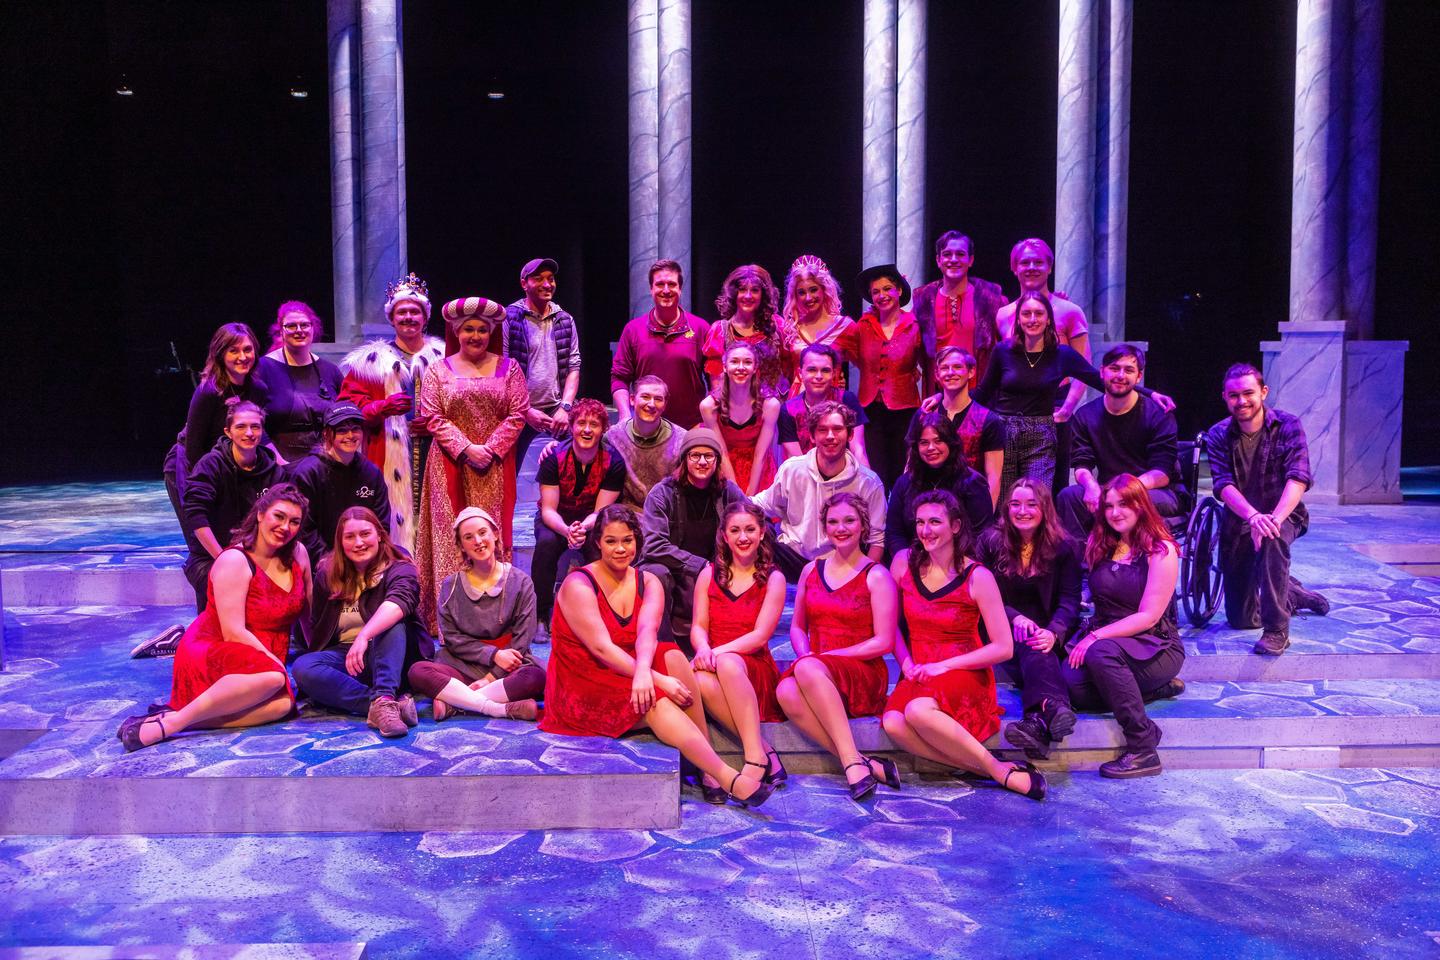 Cast and crew of Pippin